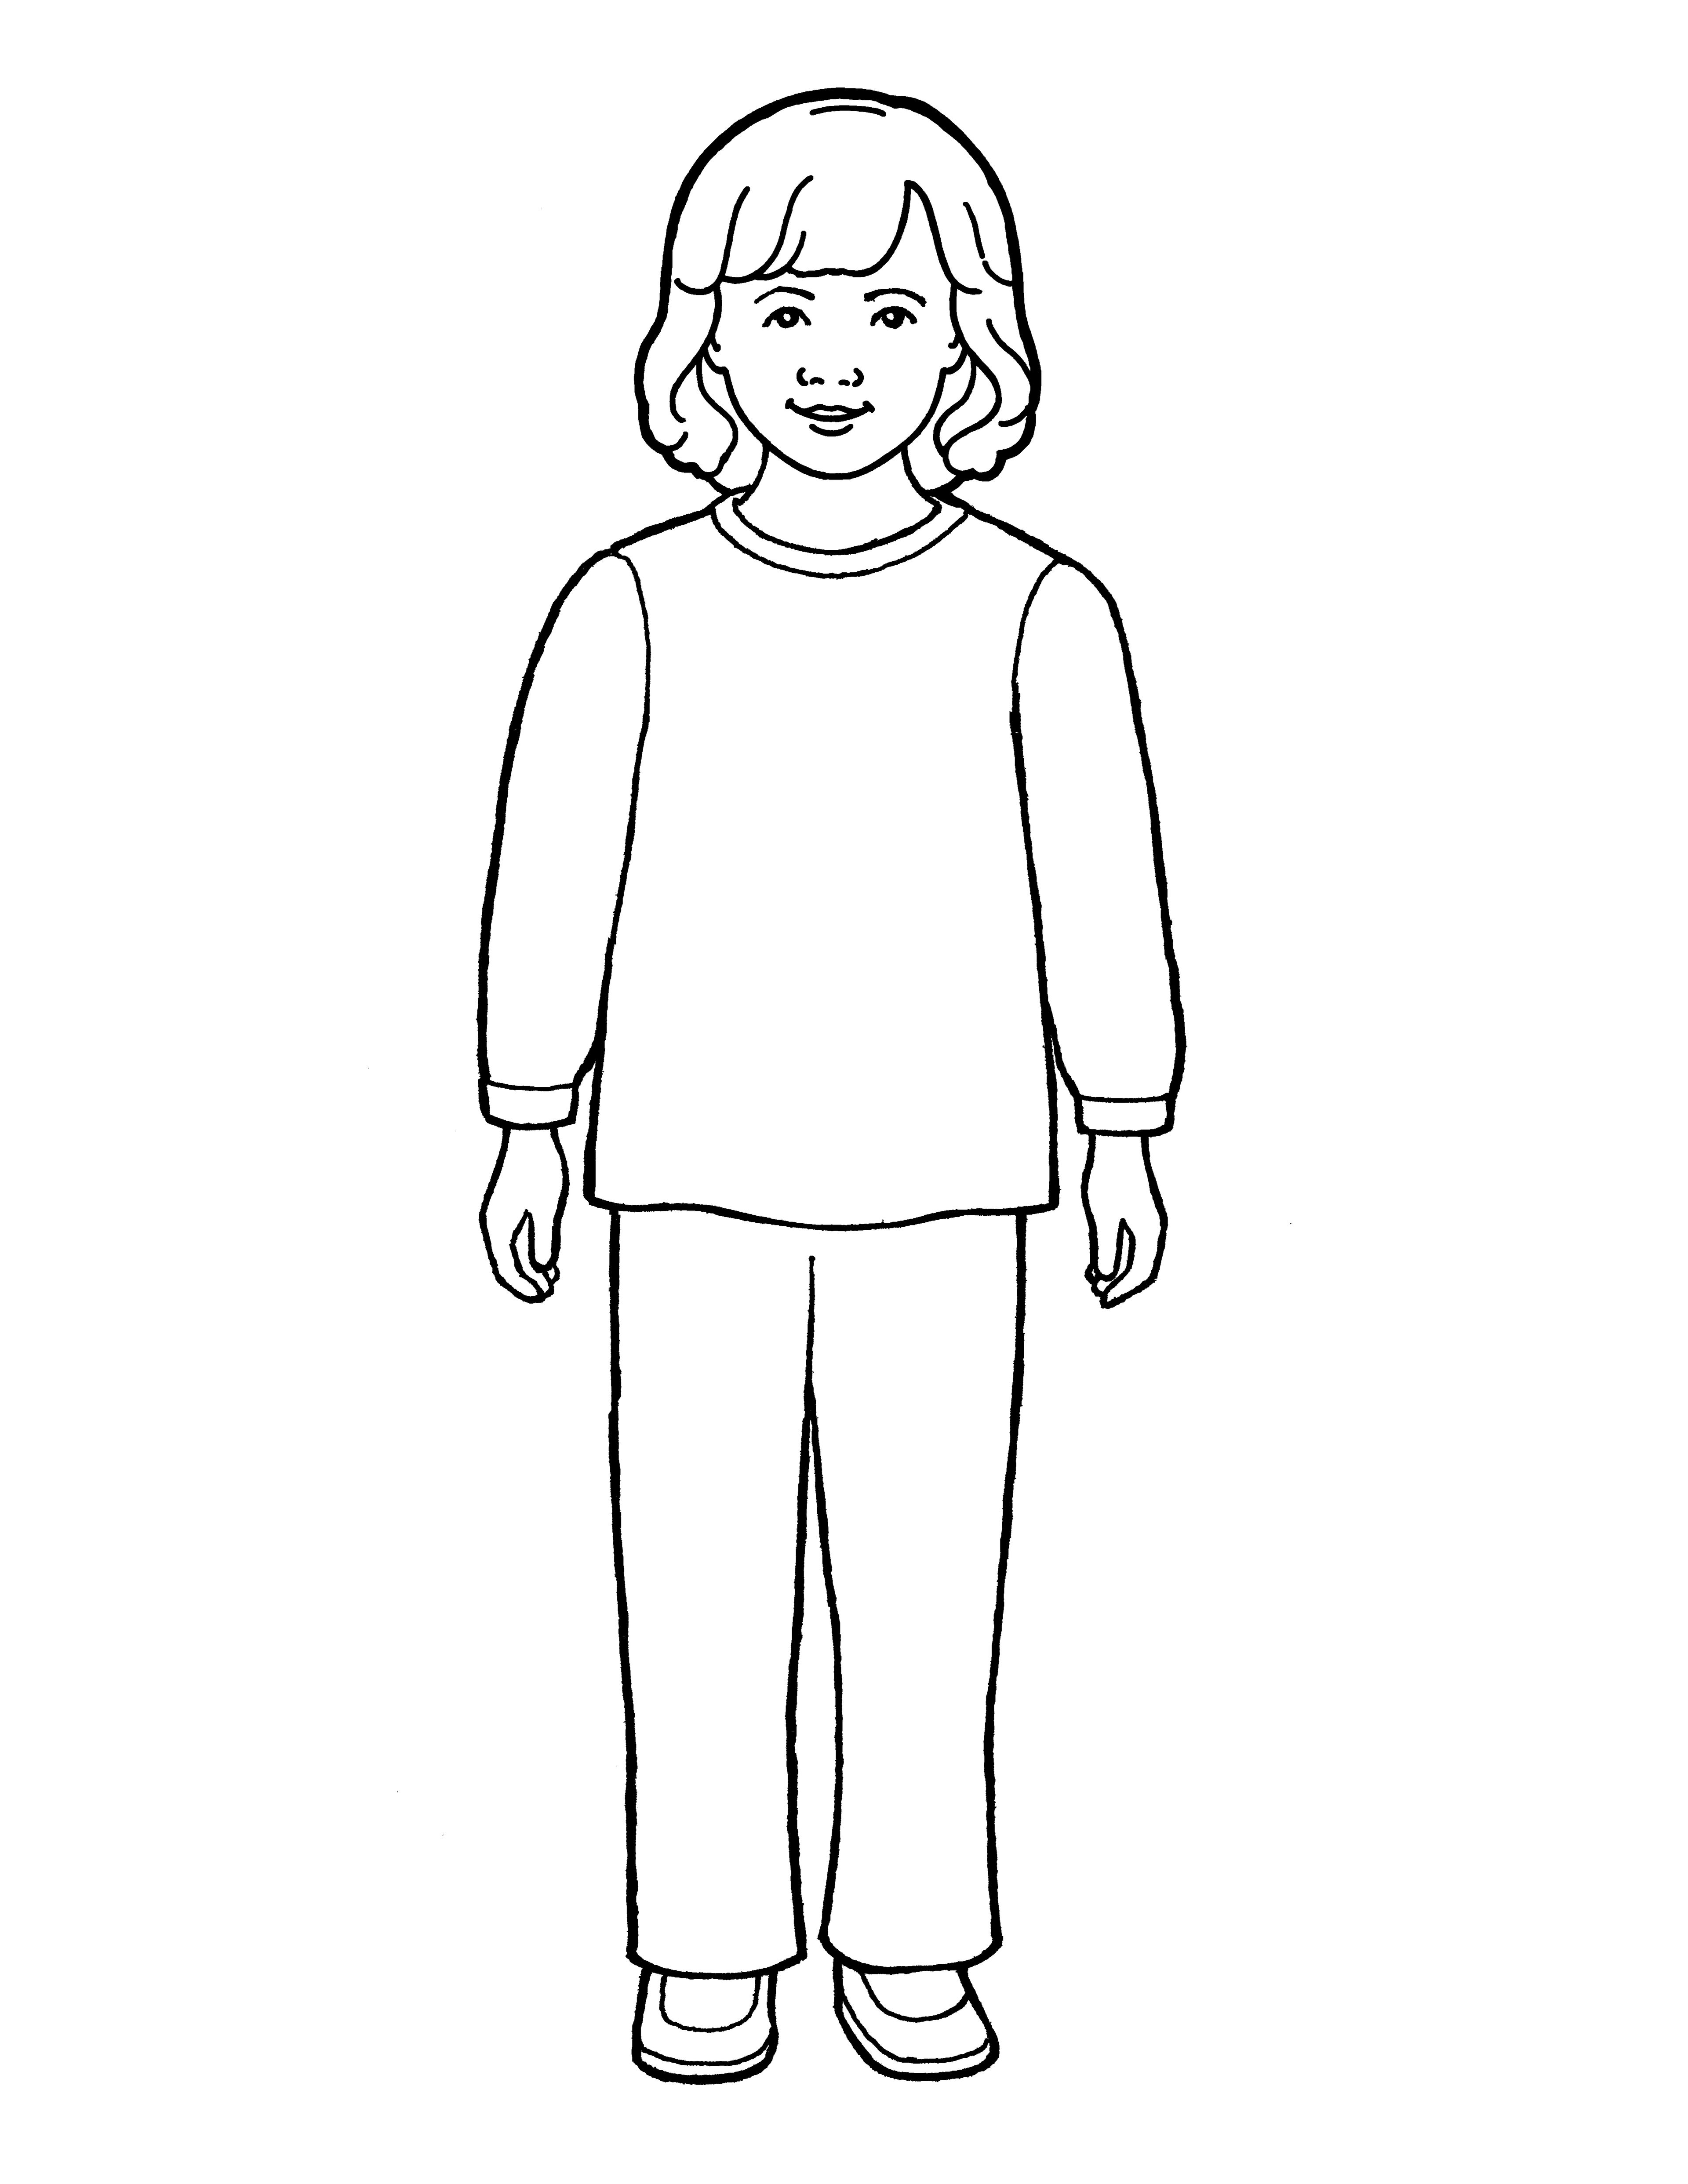 An illustration of a daughter or sister, from the nursery manual Behold Your Little Ones (2008), page 51.